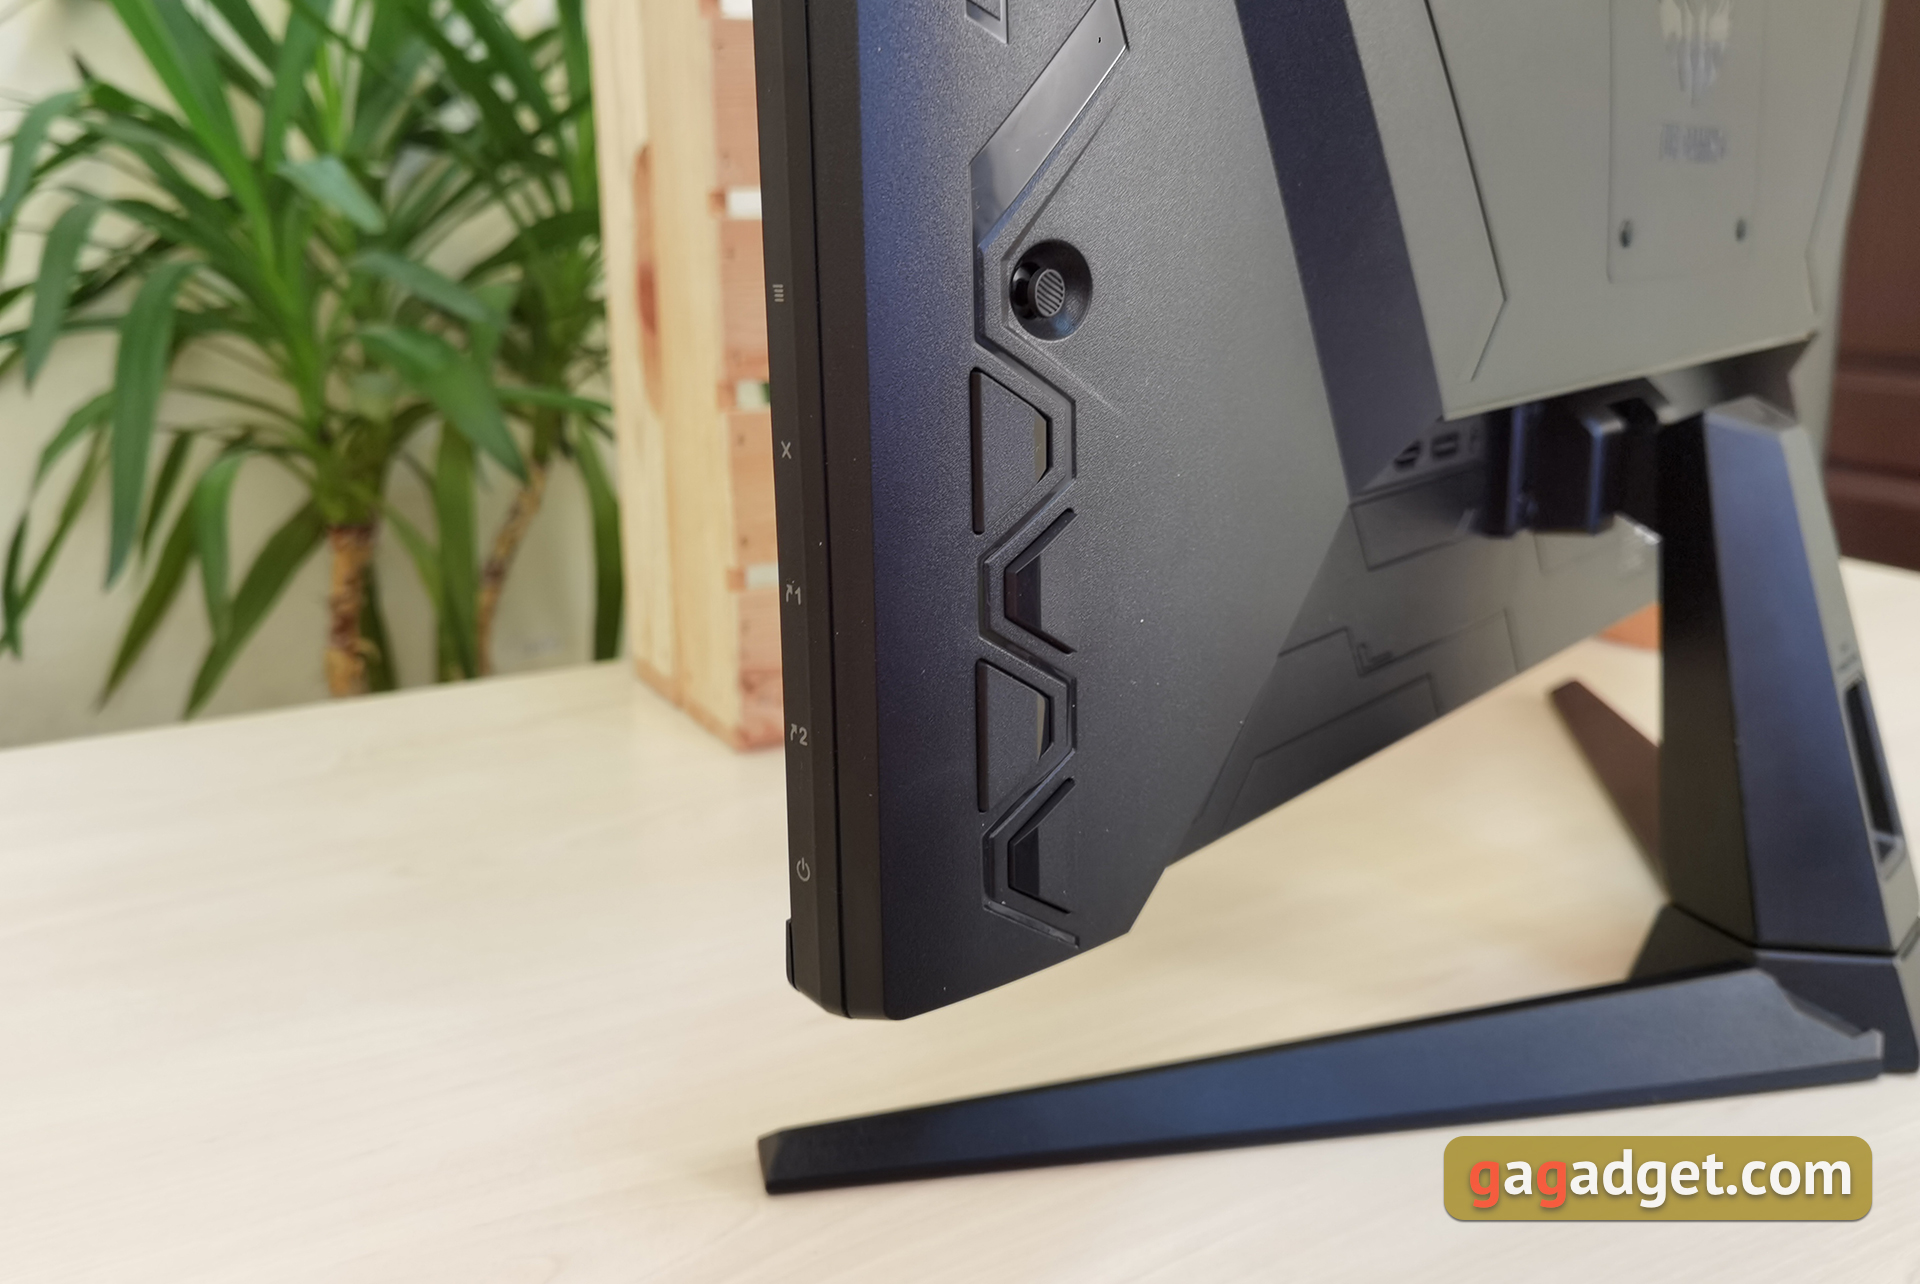 ASUS TUF Gaming VG279Q1A review: 27-inch gaming monitor with IPS panel and 165 Hz refresh rate-31